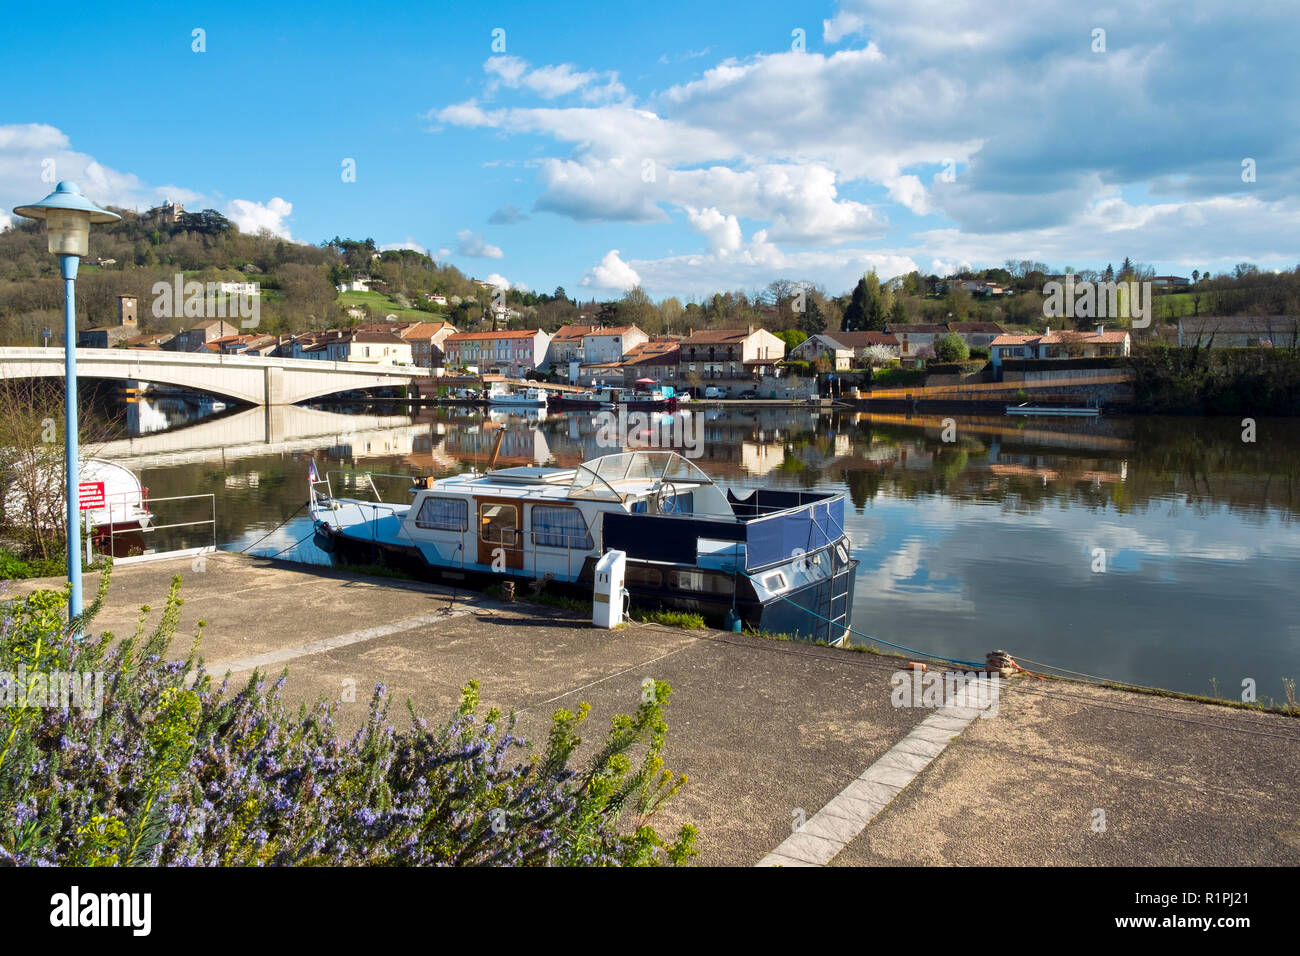 28th March 2017 -  Saint- Sylvestre-sur-Lot, France: Boats moored in spring morning sunshine on the placid River Lot at Saint- Sylvestre-sur-Lot, Lot-et-Garonne, France. Across the river is Port de Penne, the ancient river port for Penne d'Agenais town. Stock Photo